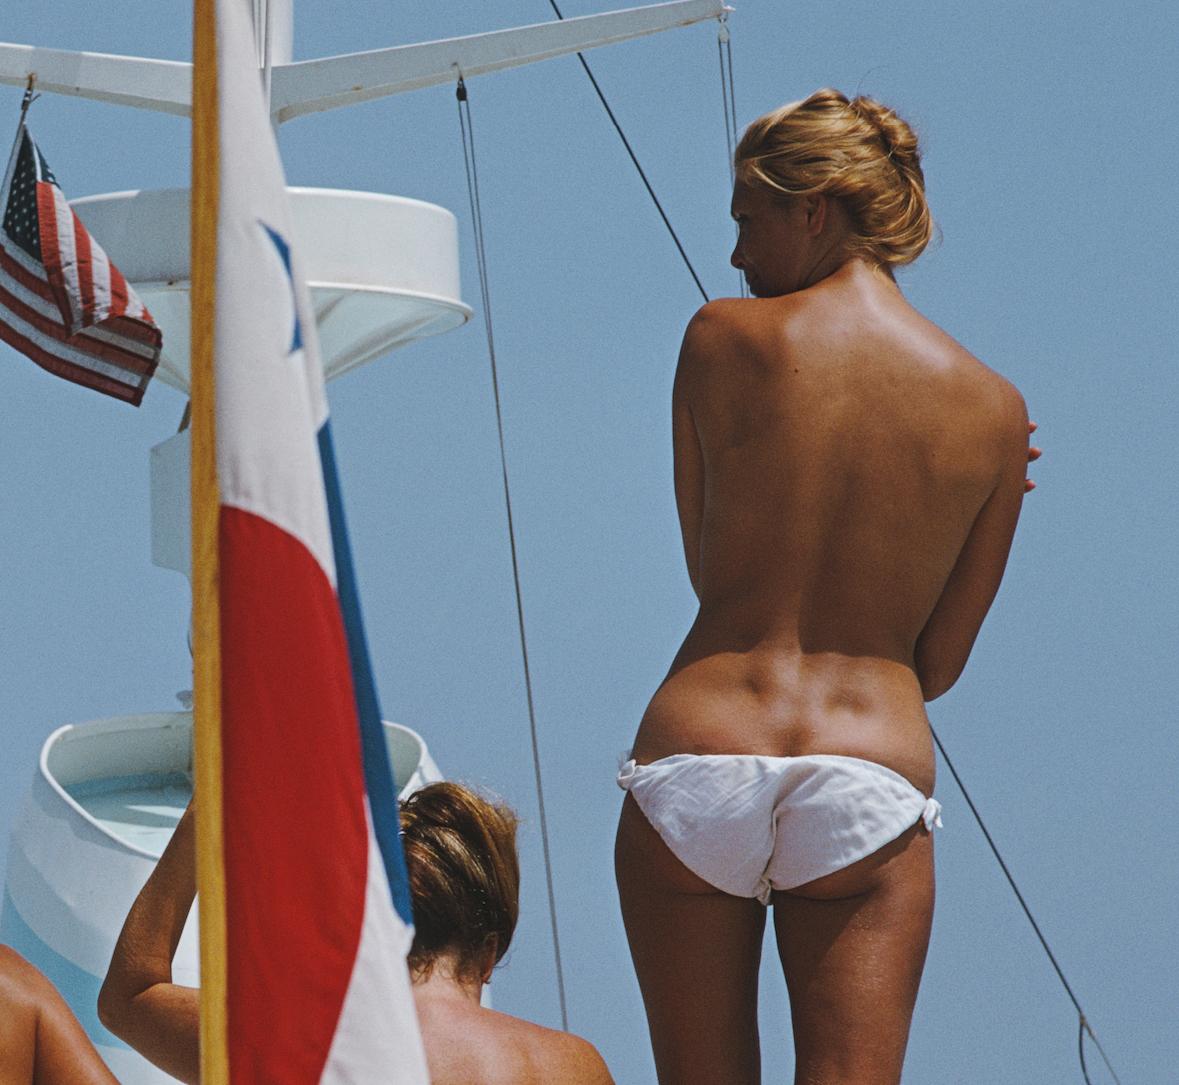 'Yacht Holiday' by Slim Aarons 

Limited Edition Estate Print
limited to 150 only 
numbered in ink & emboss stamped.

60 x 40 